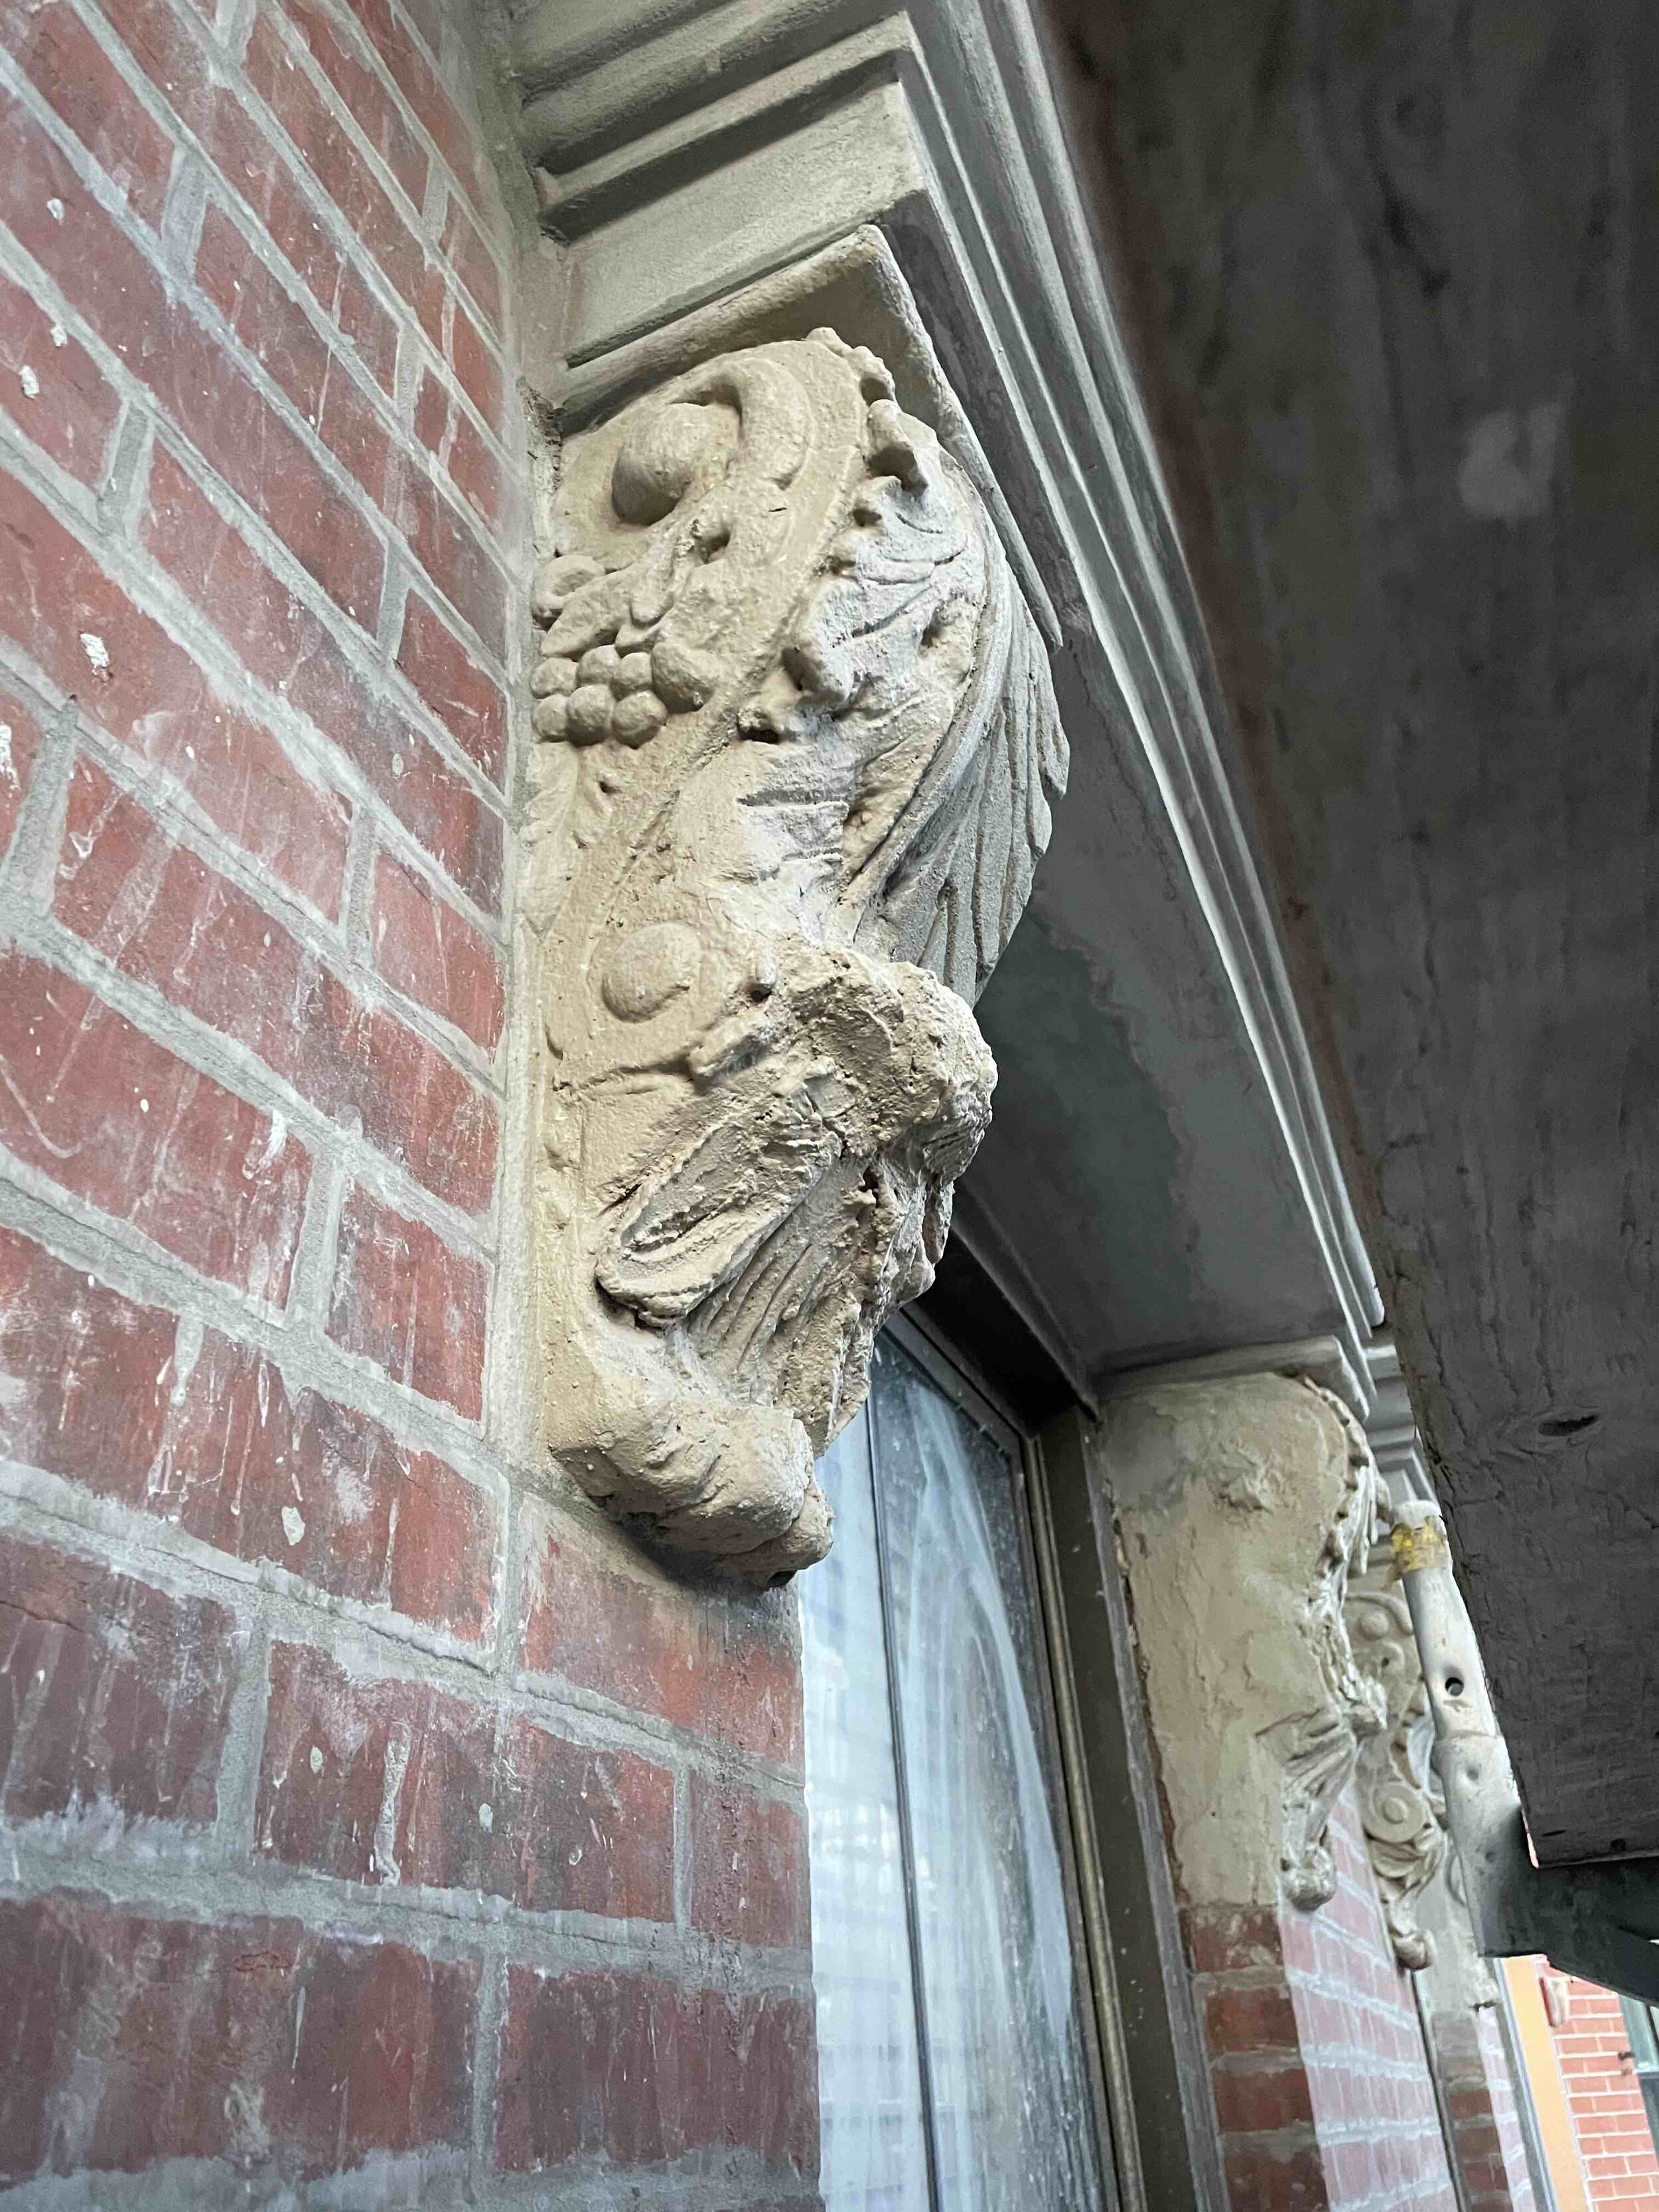 Damaged Corbels slated to be replaced